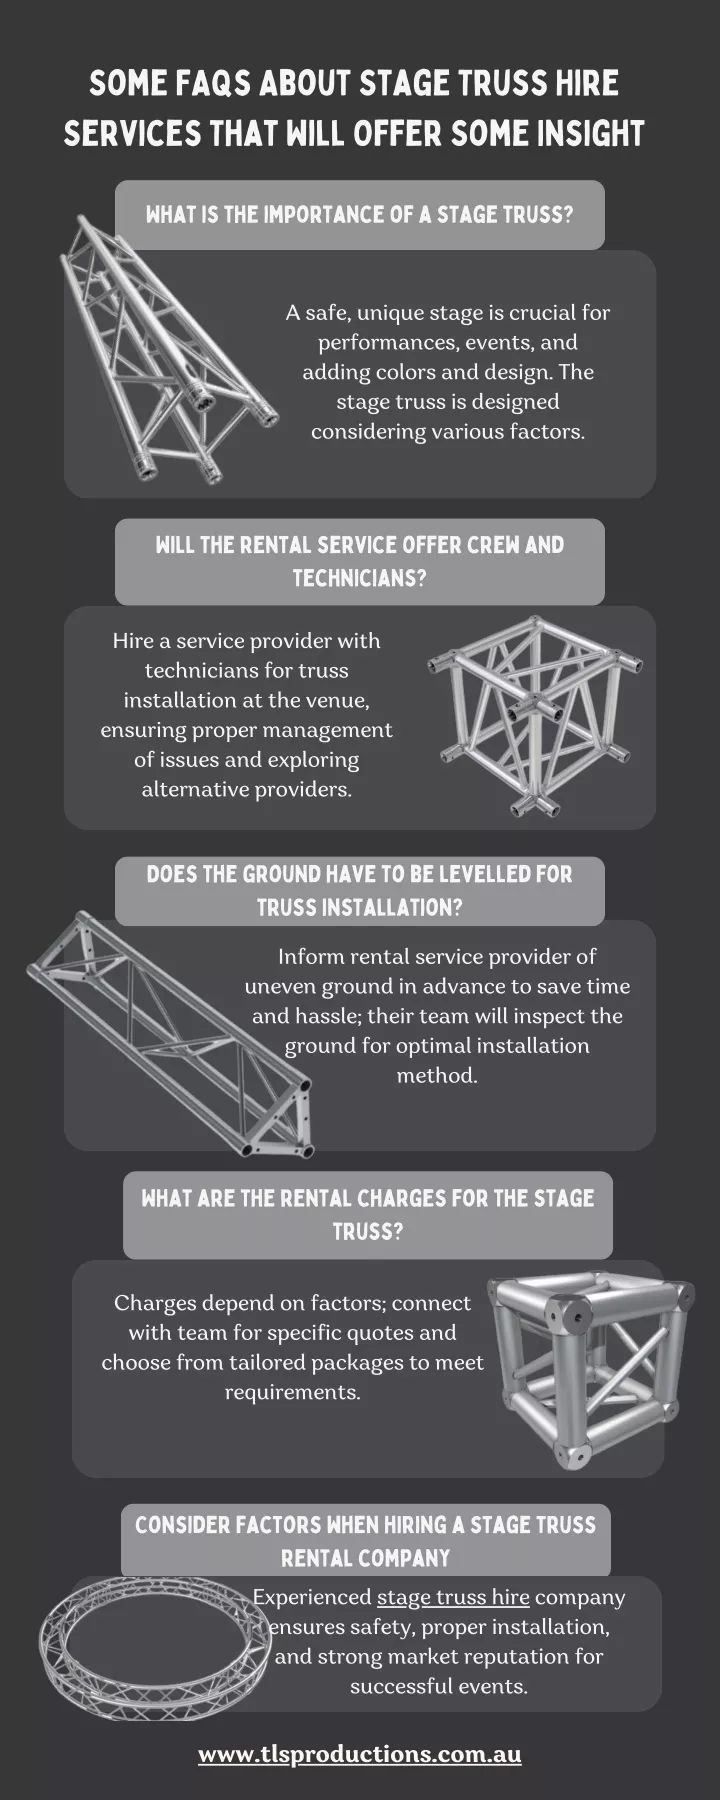 some faqs about stage truss hire services that